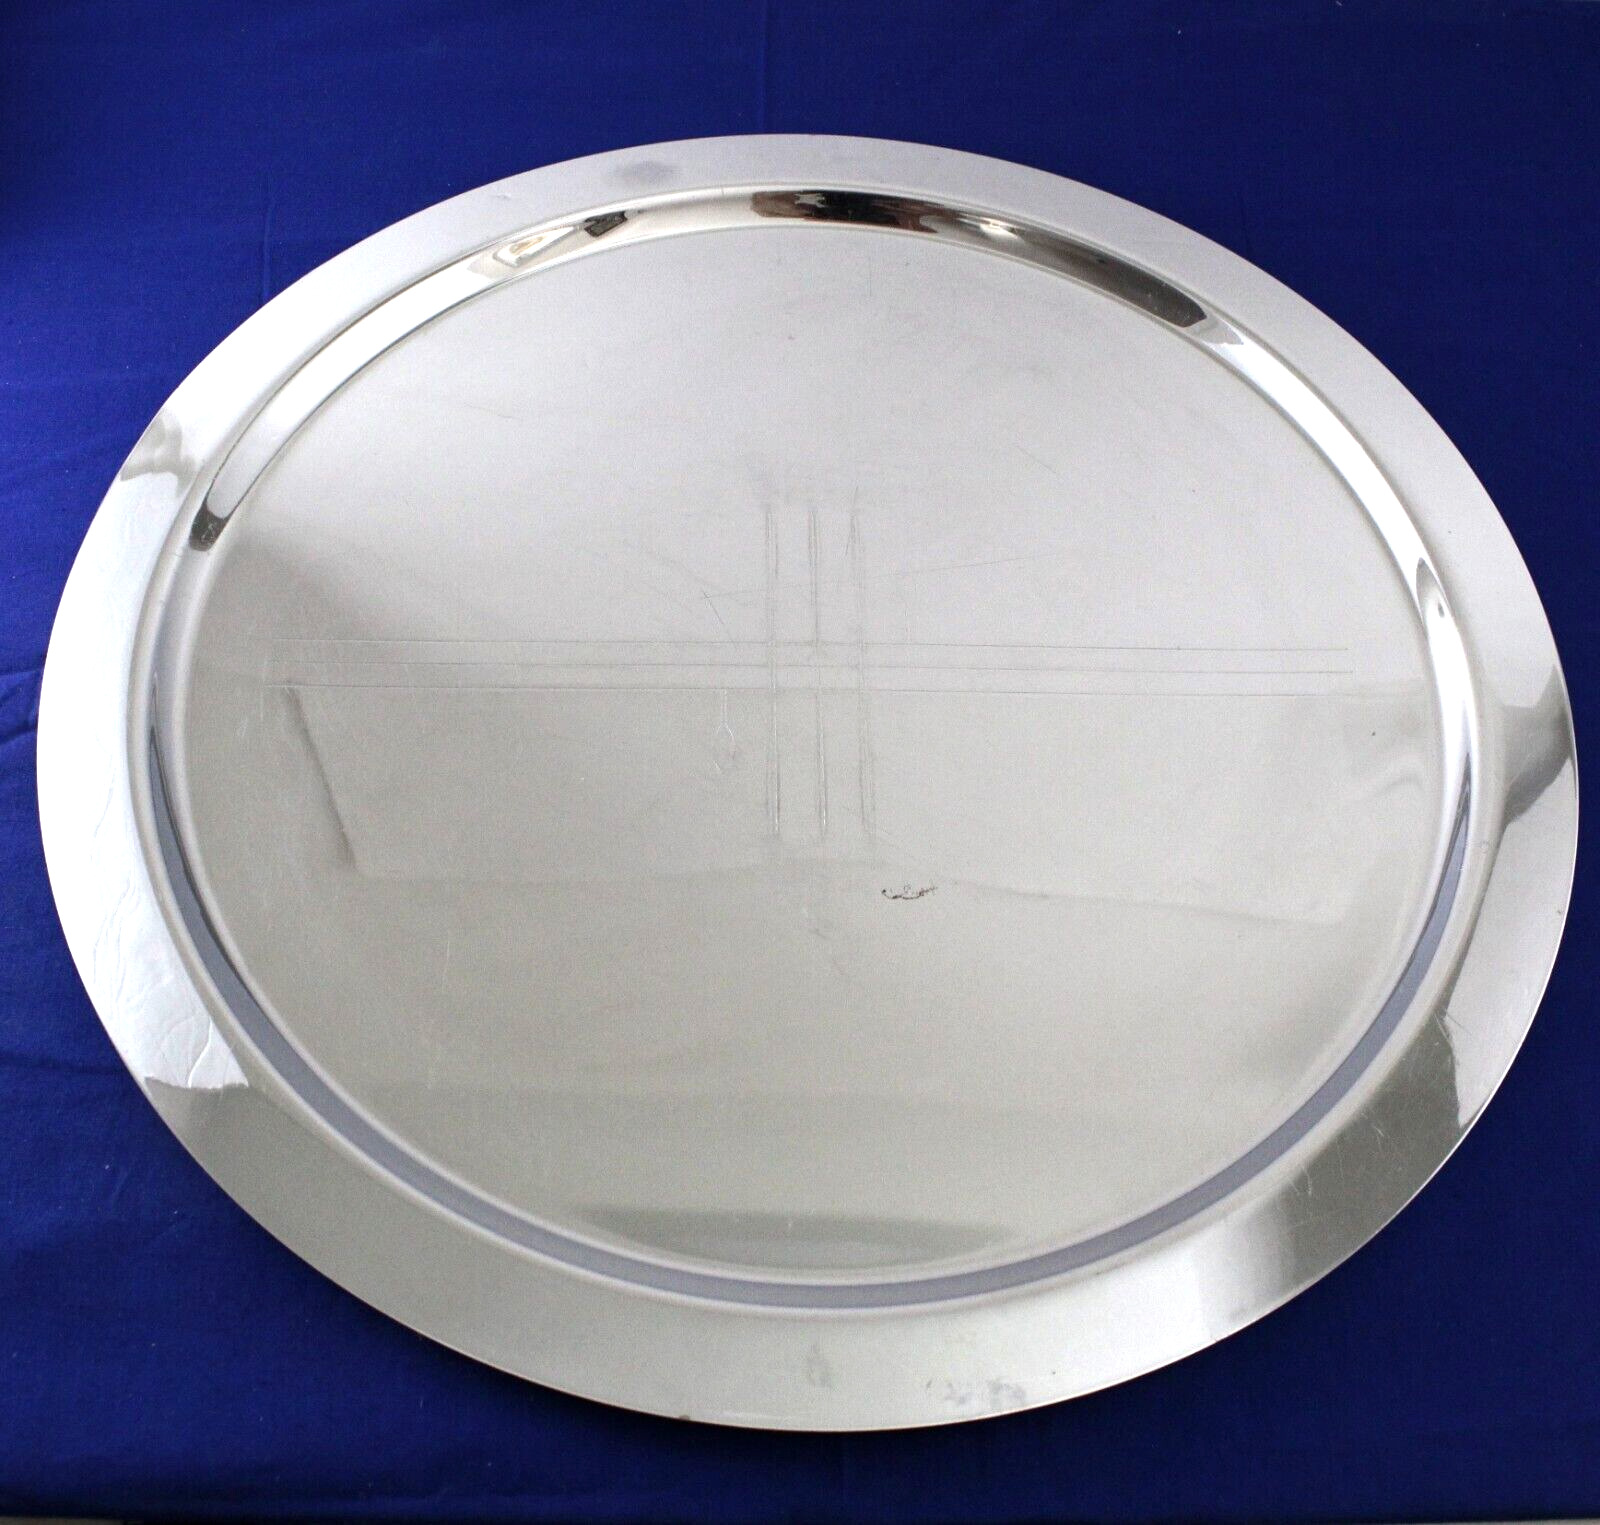 Circa 1936 Norman Bel Geddes Art Deco Cocktail Serving Tray Revere Rome NY